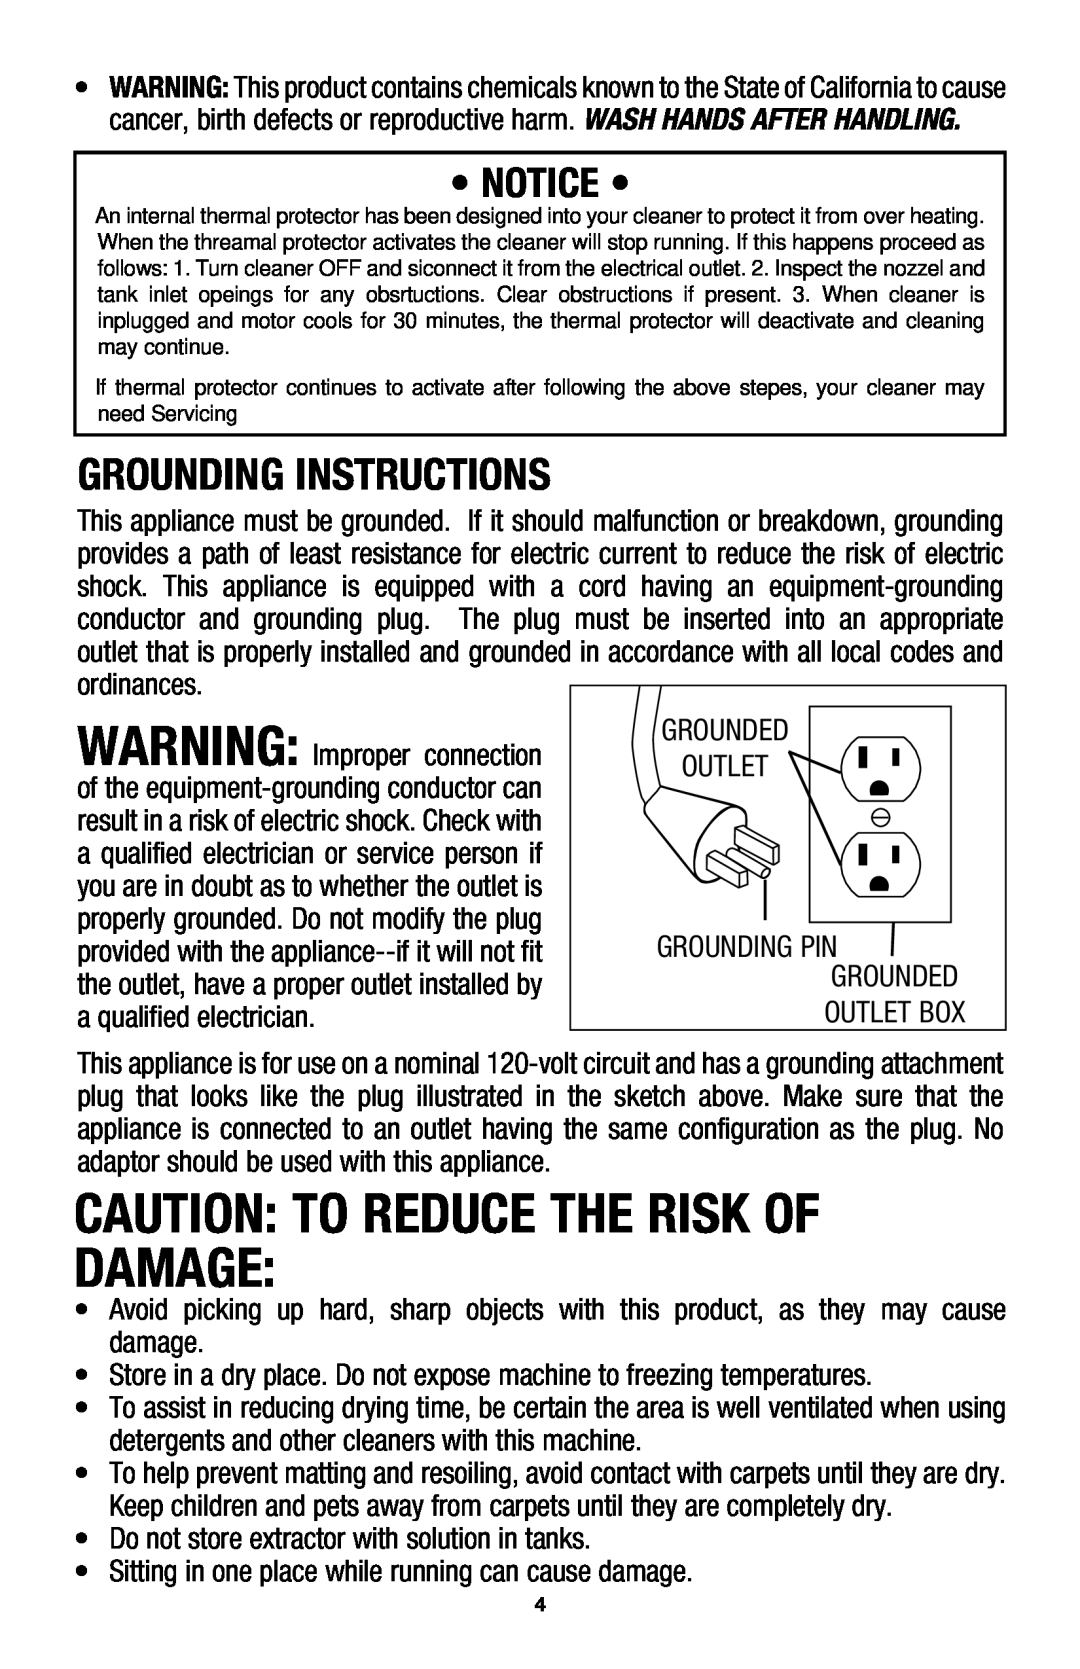 Hoover E1 owner manual Caution To Reduce The Risk Of Damage, Grounding Instructions 